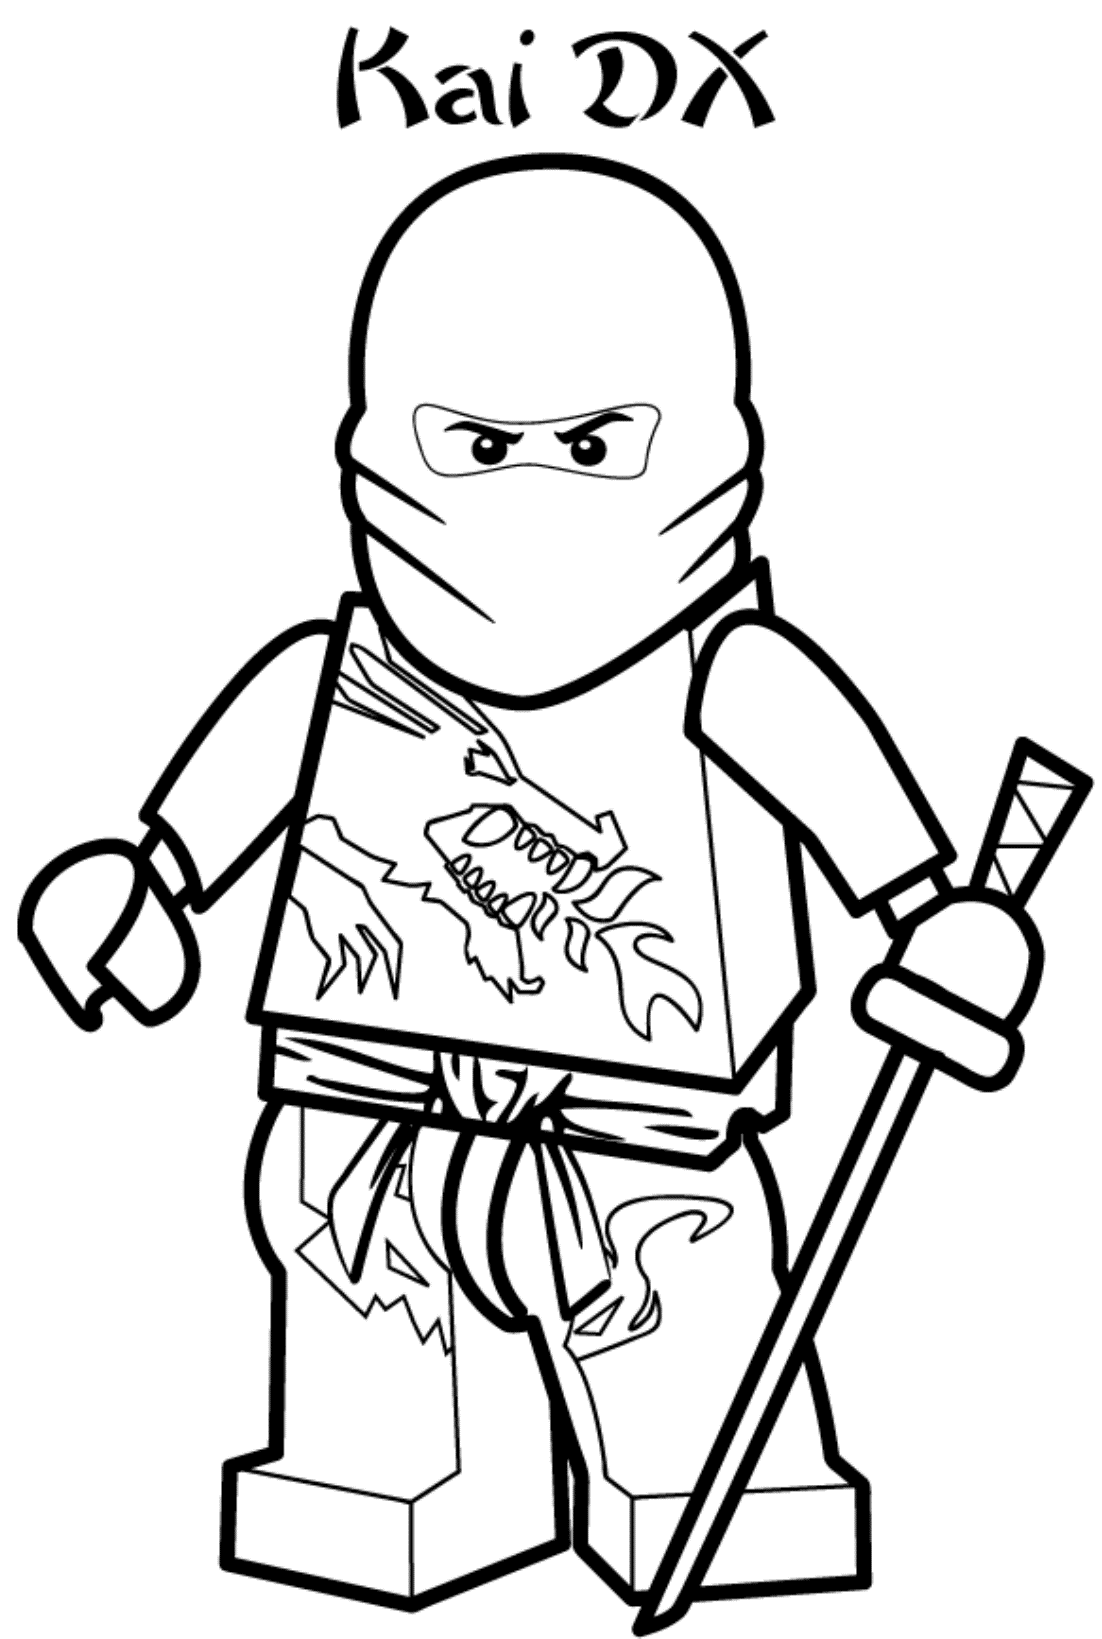 Lego Ninjago Coloring Pages Kai Zx - High Quality Coloring Pages